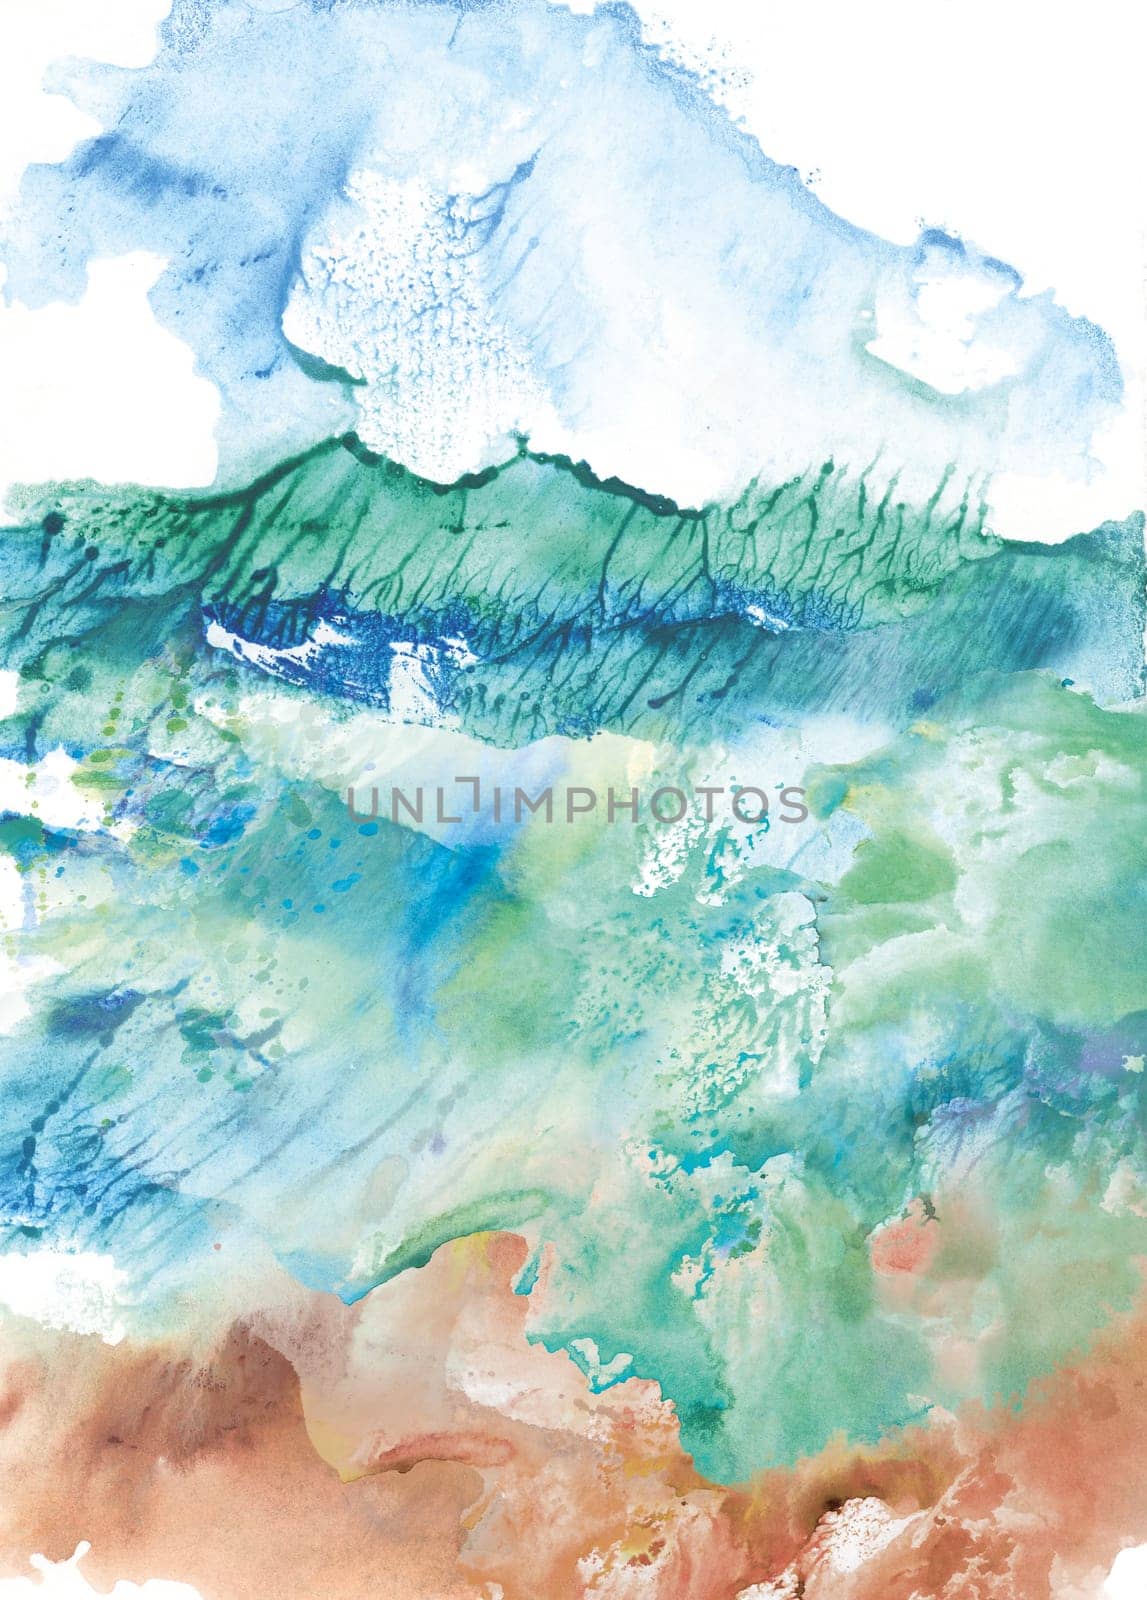 Background from Monotype paints and gradients with multi-colored blots abstract landscape isolated by MarinaVoyush